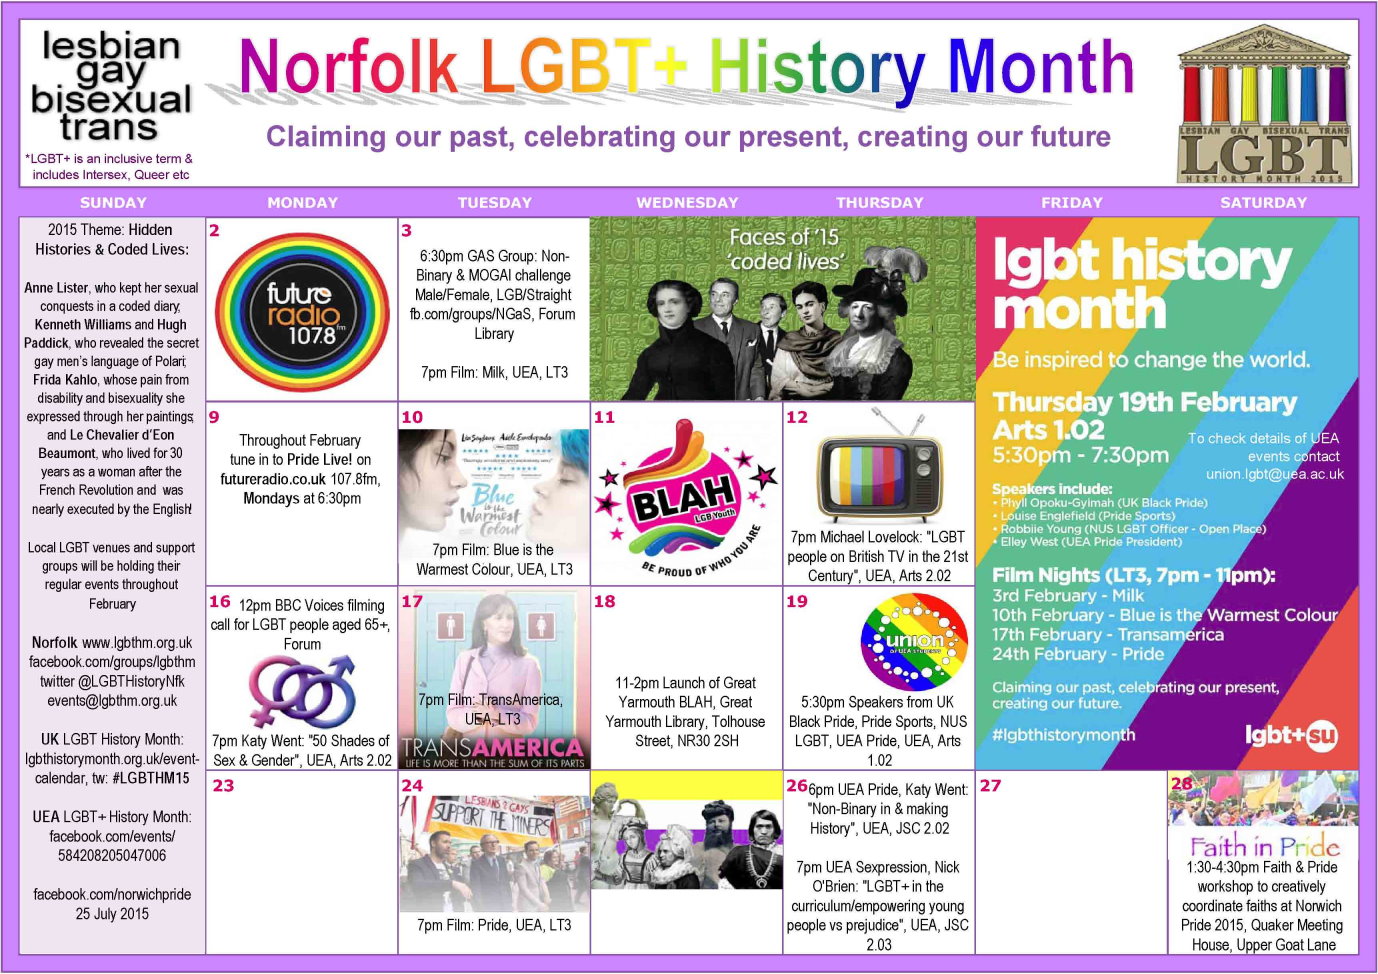 Click to view or download full A4 LGBT History Month Norfolk pdf calendar